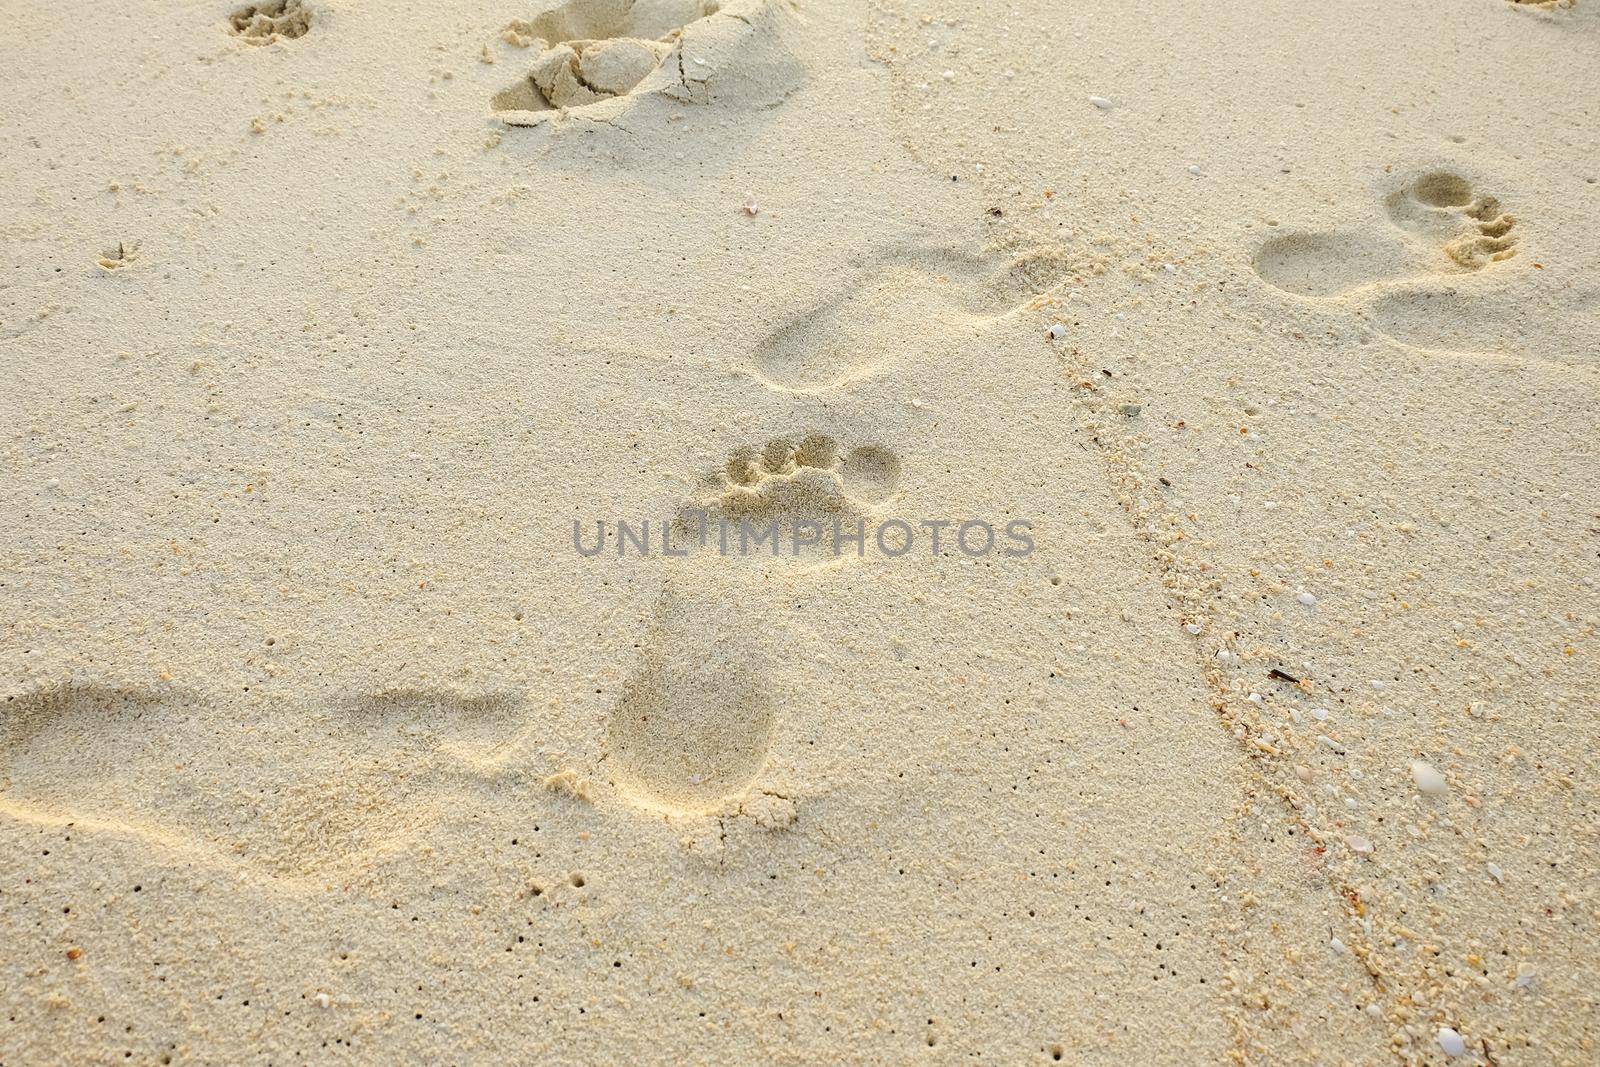 Footprints in wet sand close to sea in sunny day by Wmpix